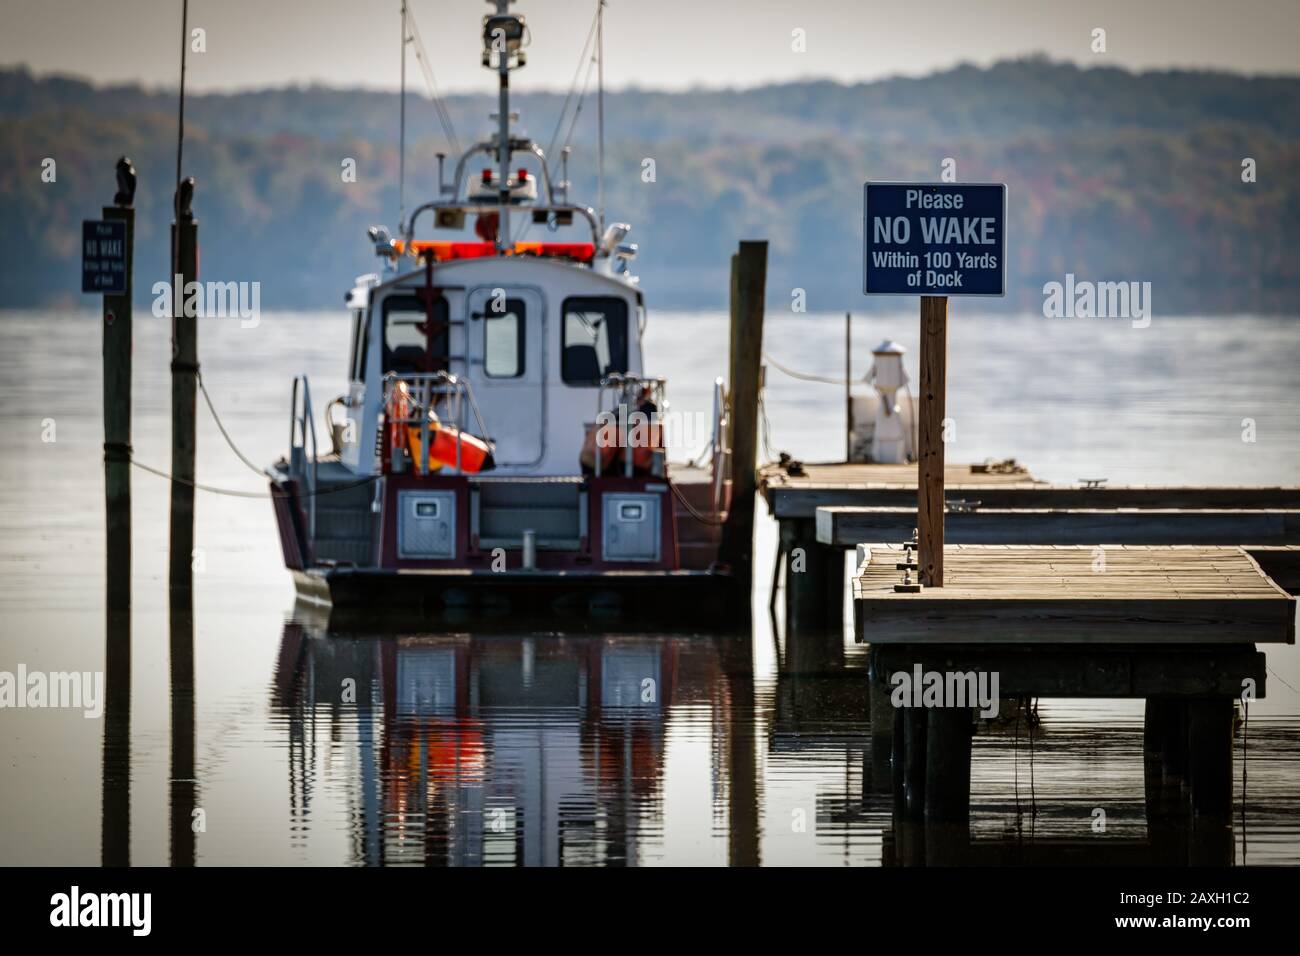 A “no wake” sign on a rescue boat dock at a Potomac River cove in Virginia. Stock Photo